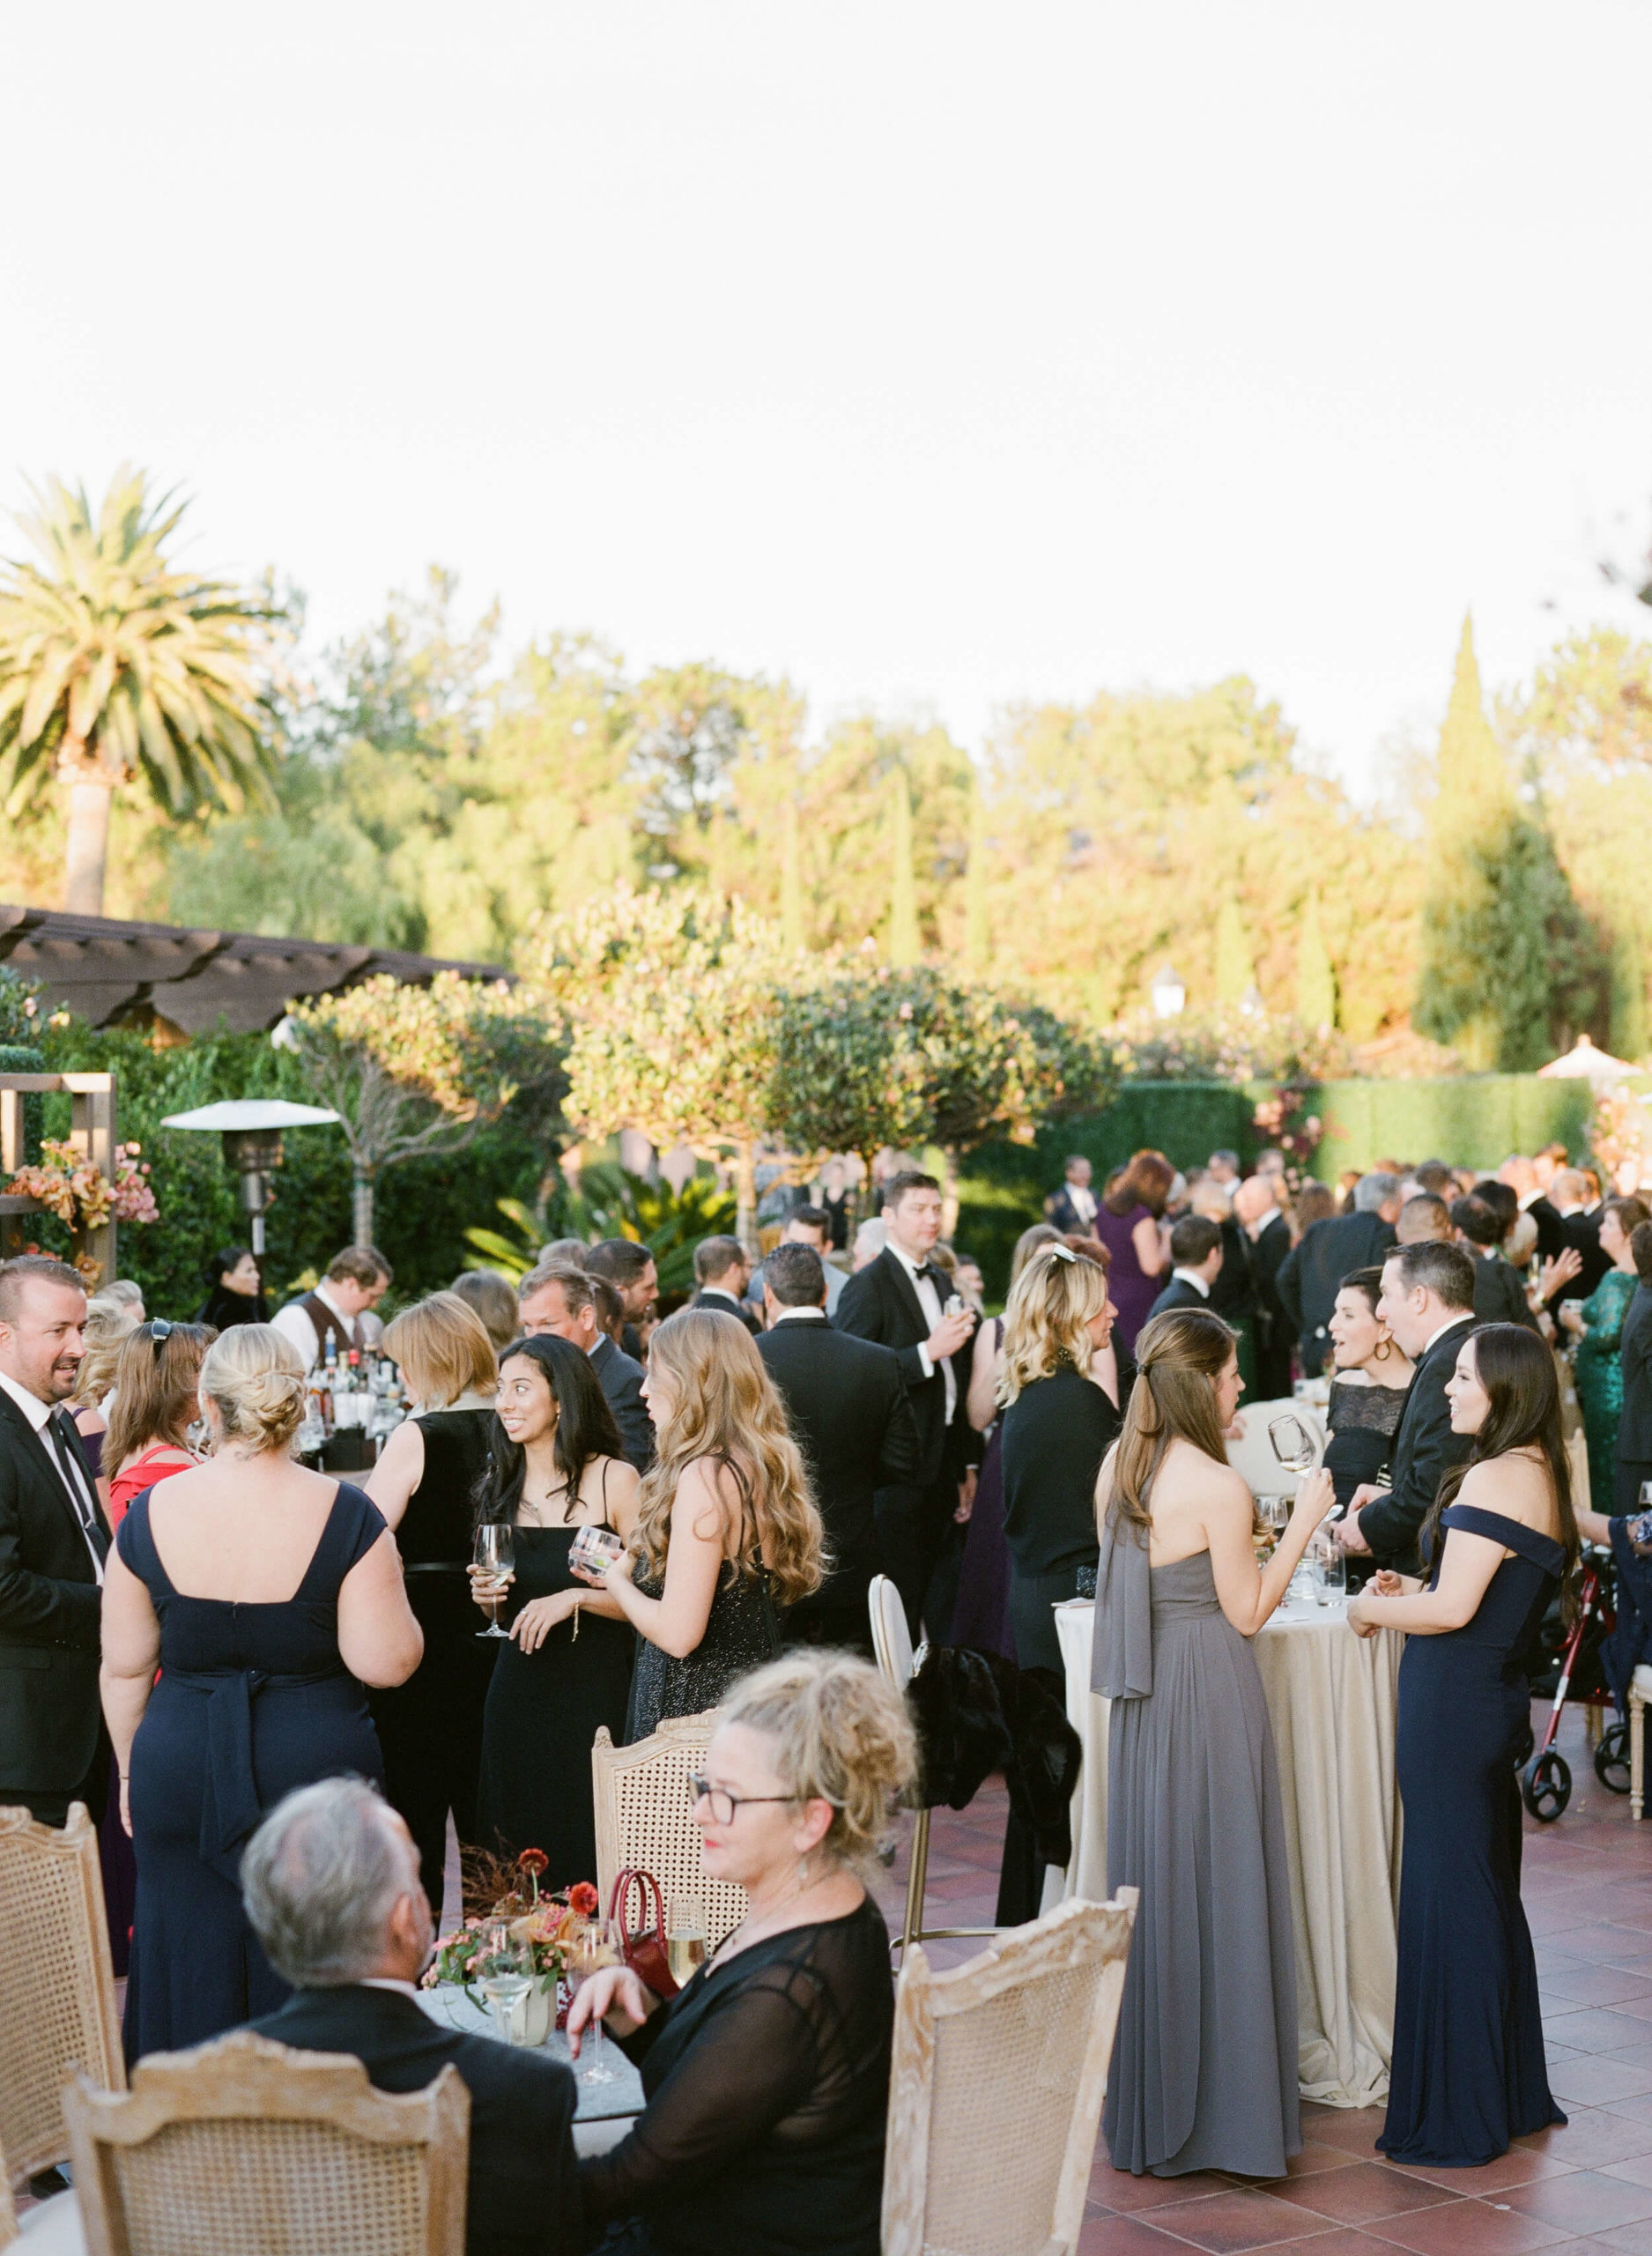 guests mingle at outdoor wedding cocktail hour